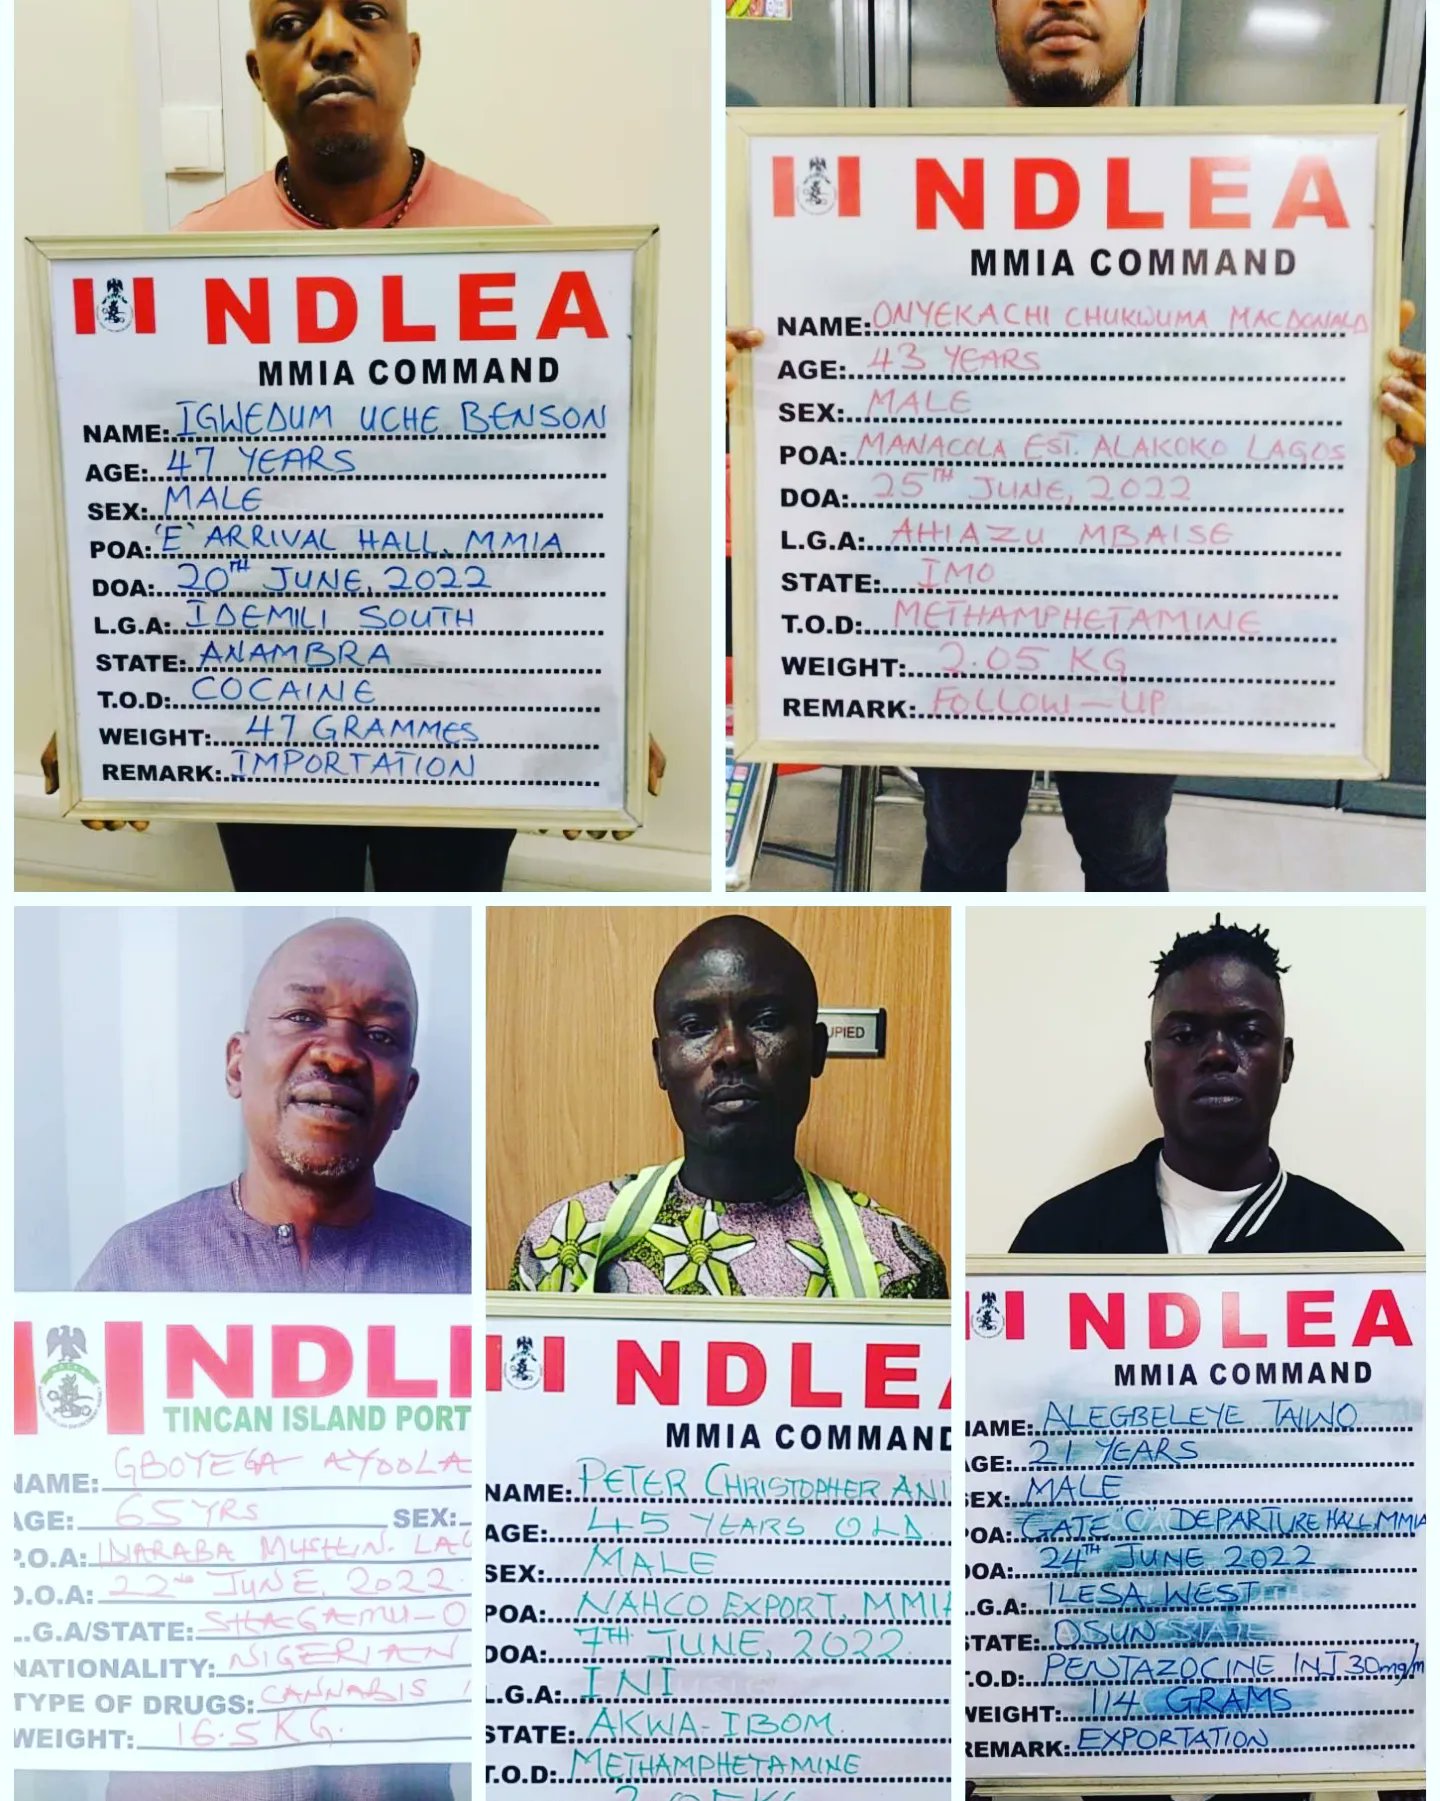 [GIST] Nigerian Anti-narcotics Agency, NDLEA Arrests Brazilian Returnee Who Hid Cocaine In Private Parts